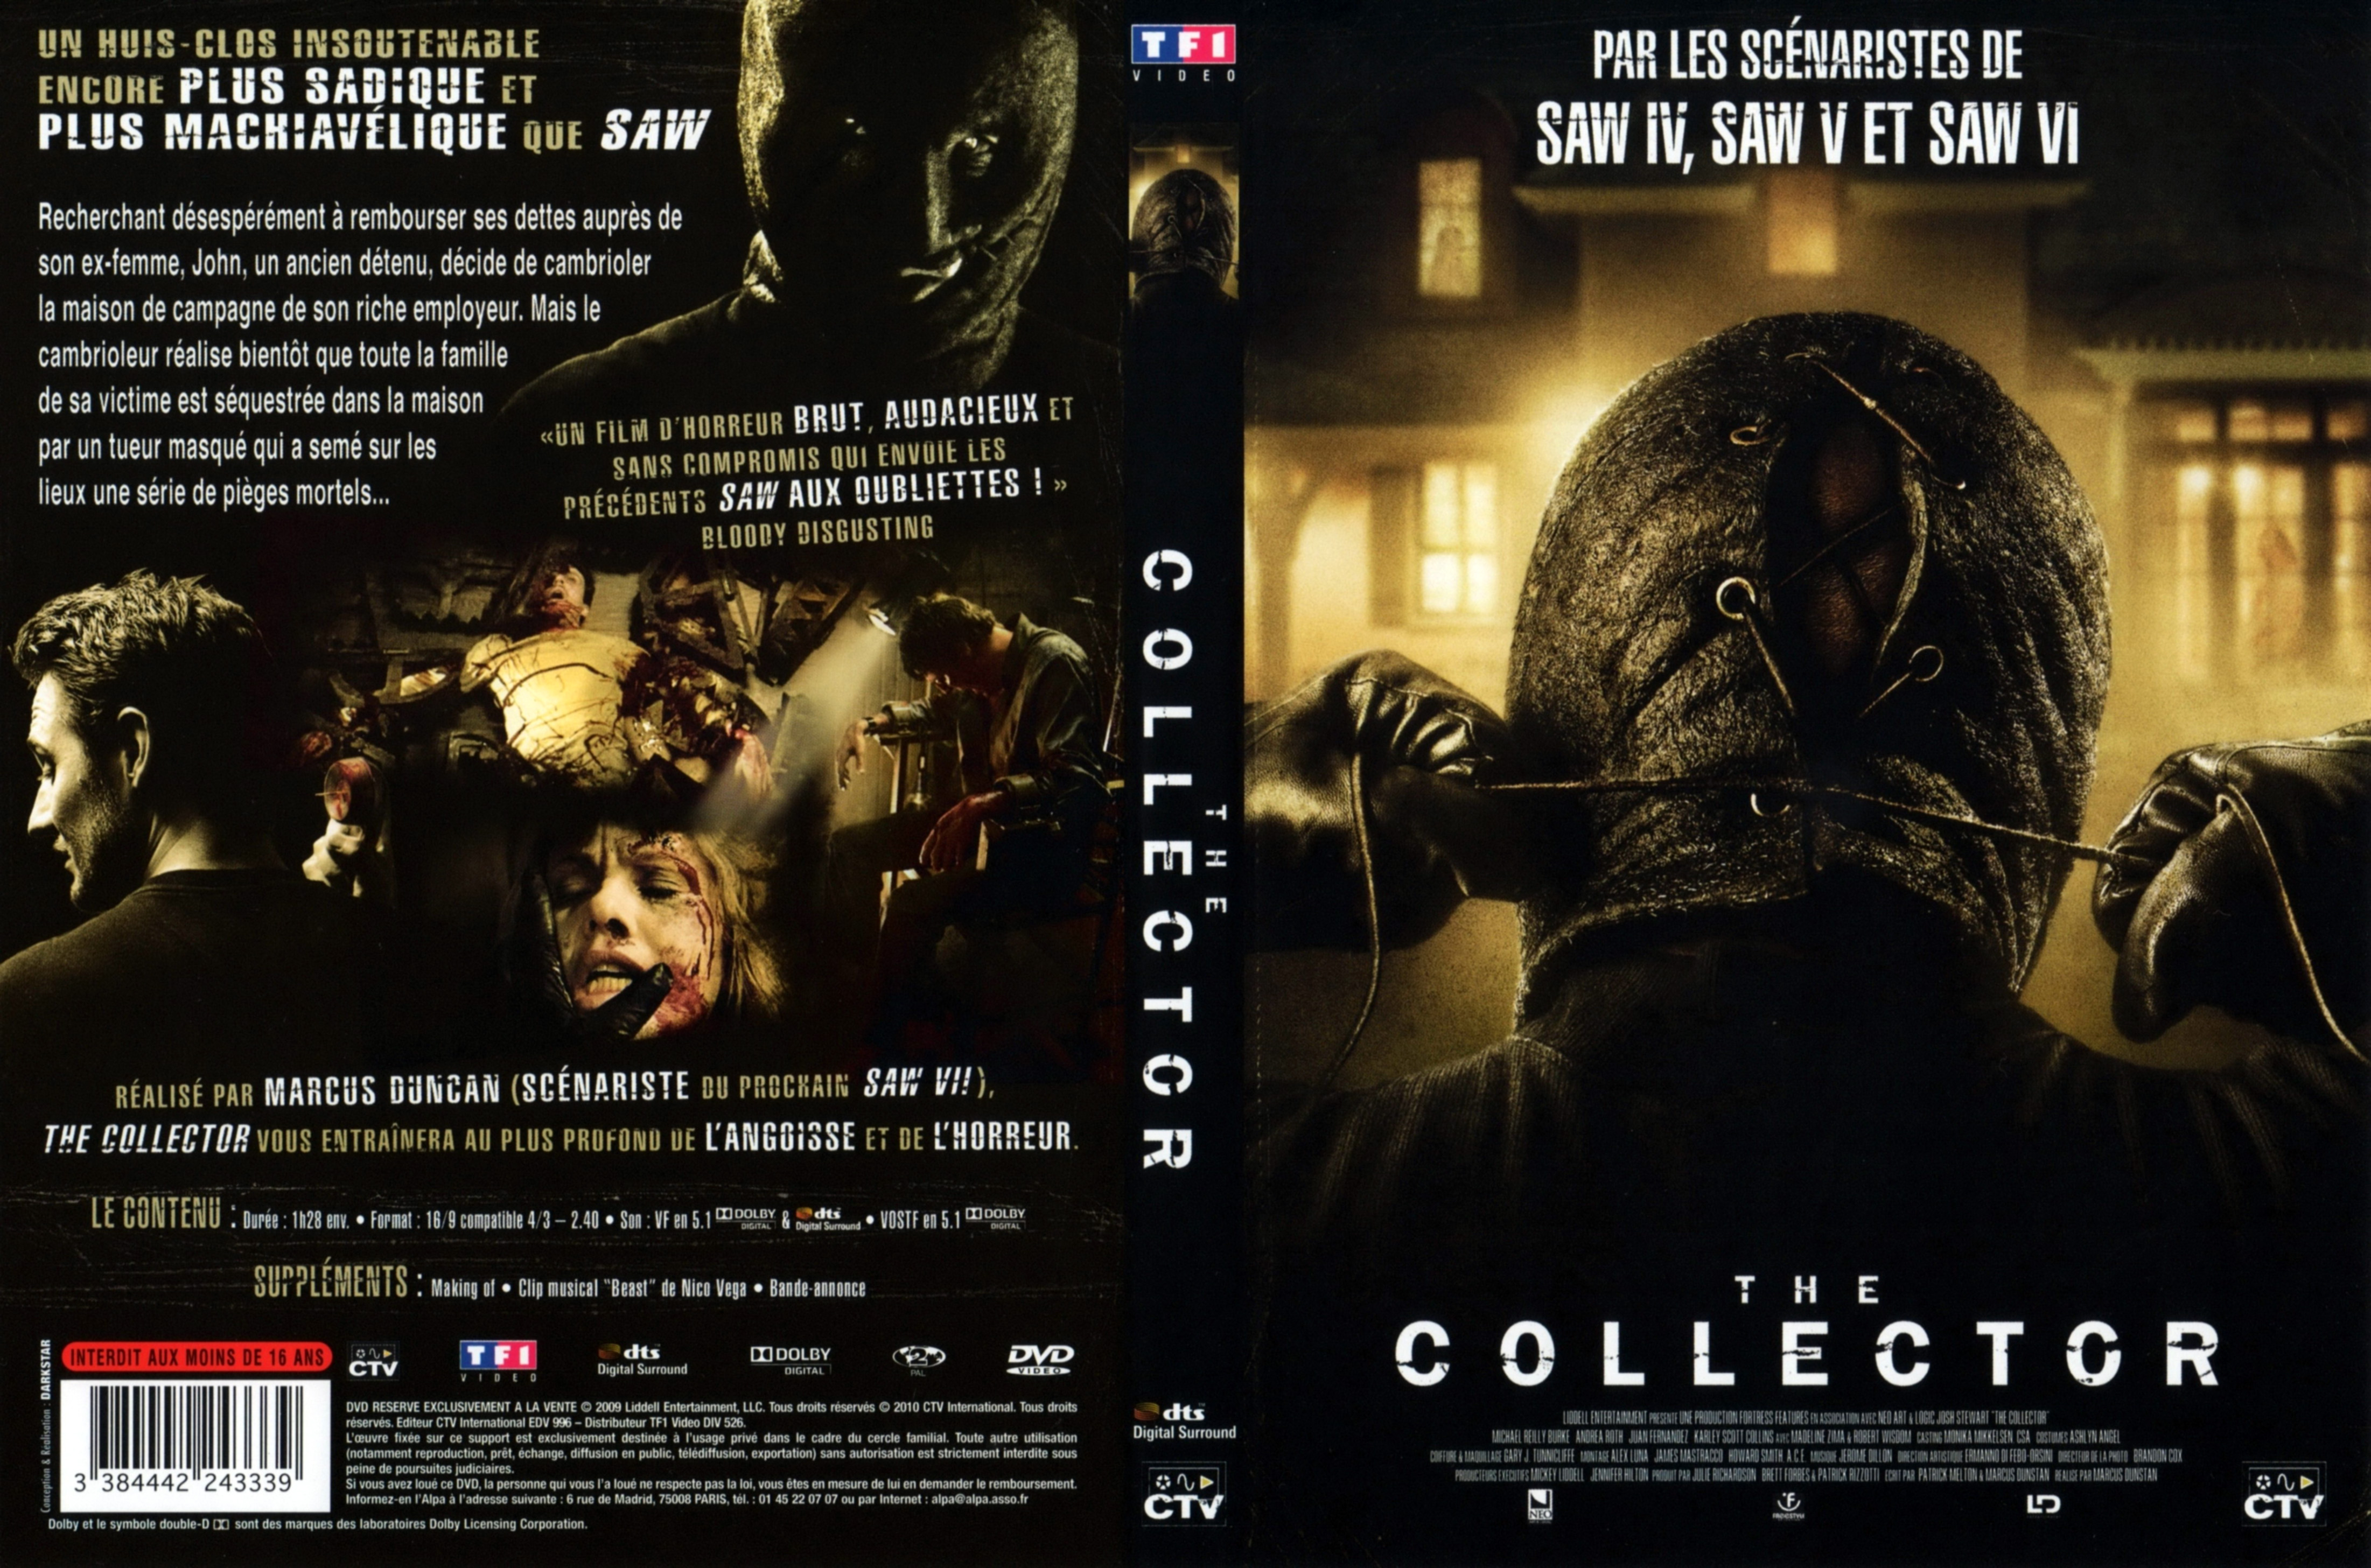 Jaquette DVD The collector (2009)